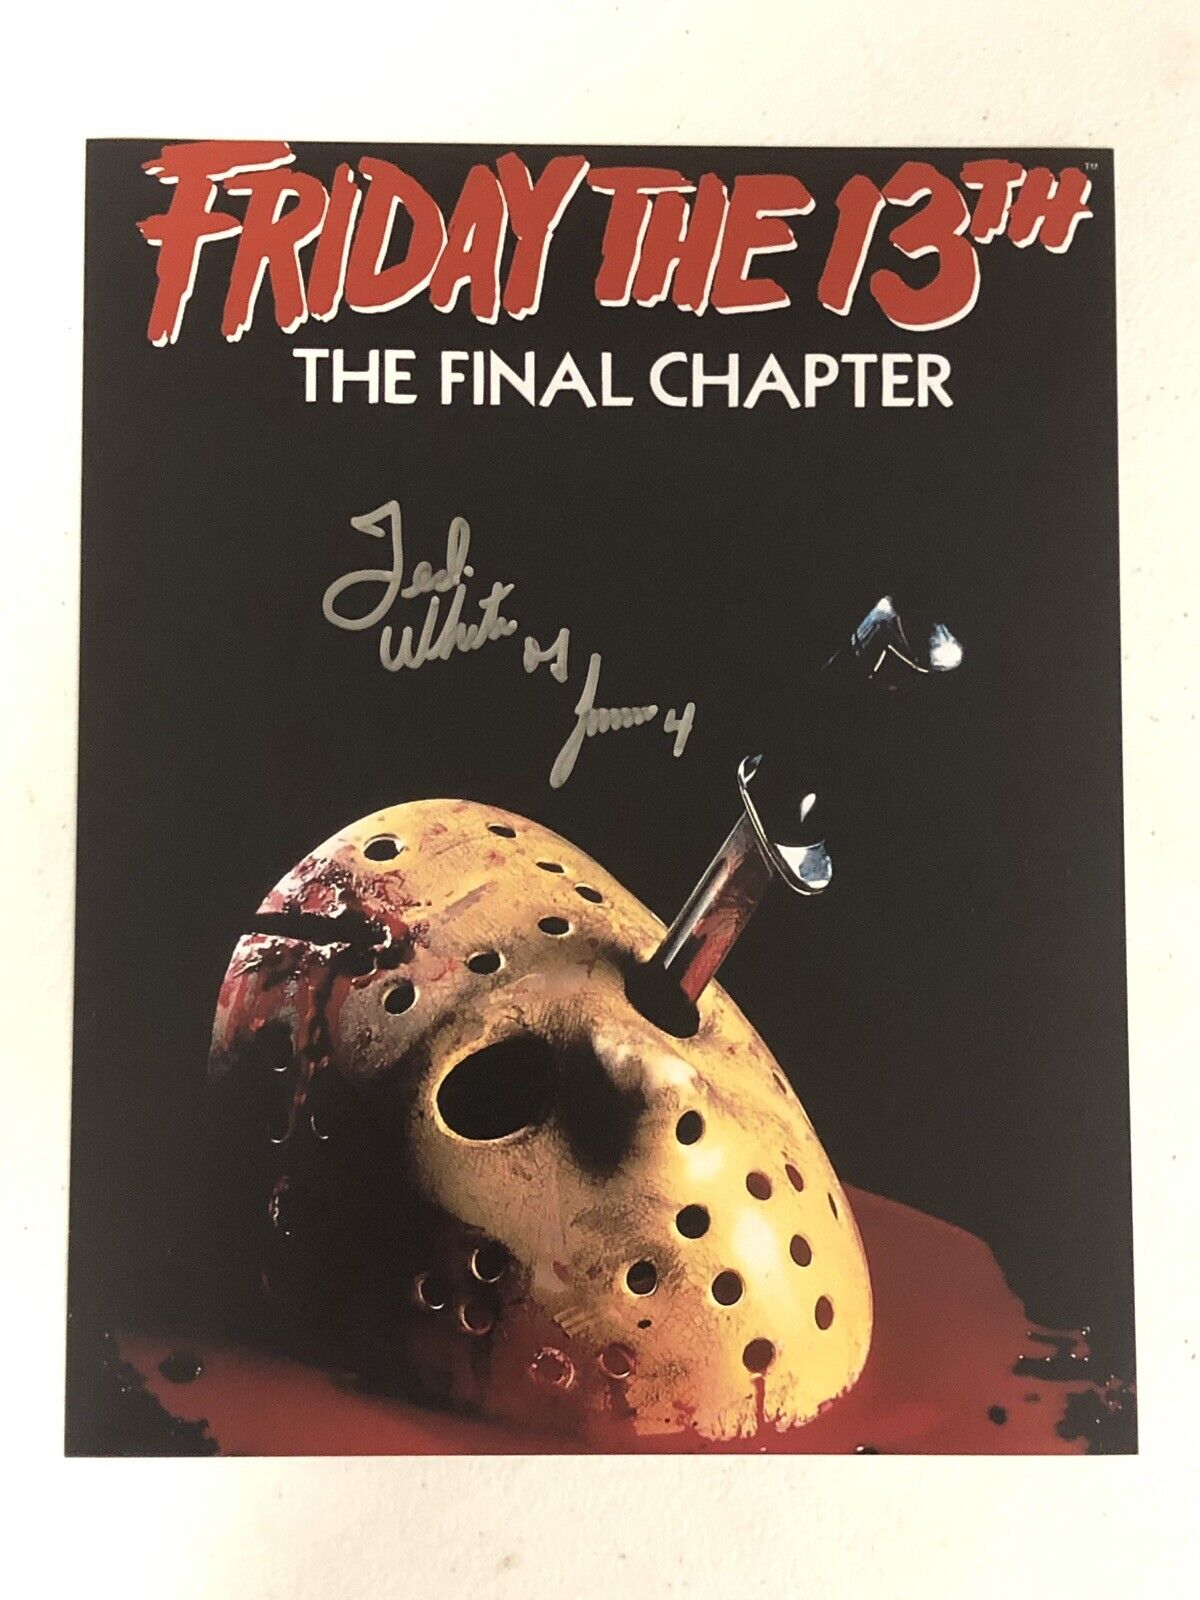 FRIDAY 13TH JASON VORHEES TED WHITE SIGNED AUTOGRAPHED 8X10 Photo Poster painting W/ EXACT PROOF